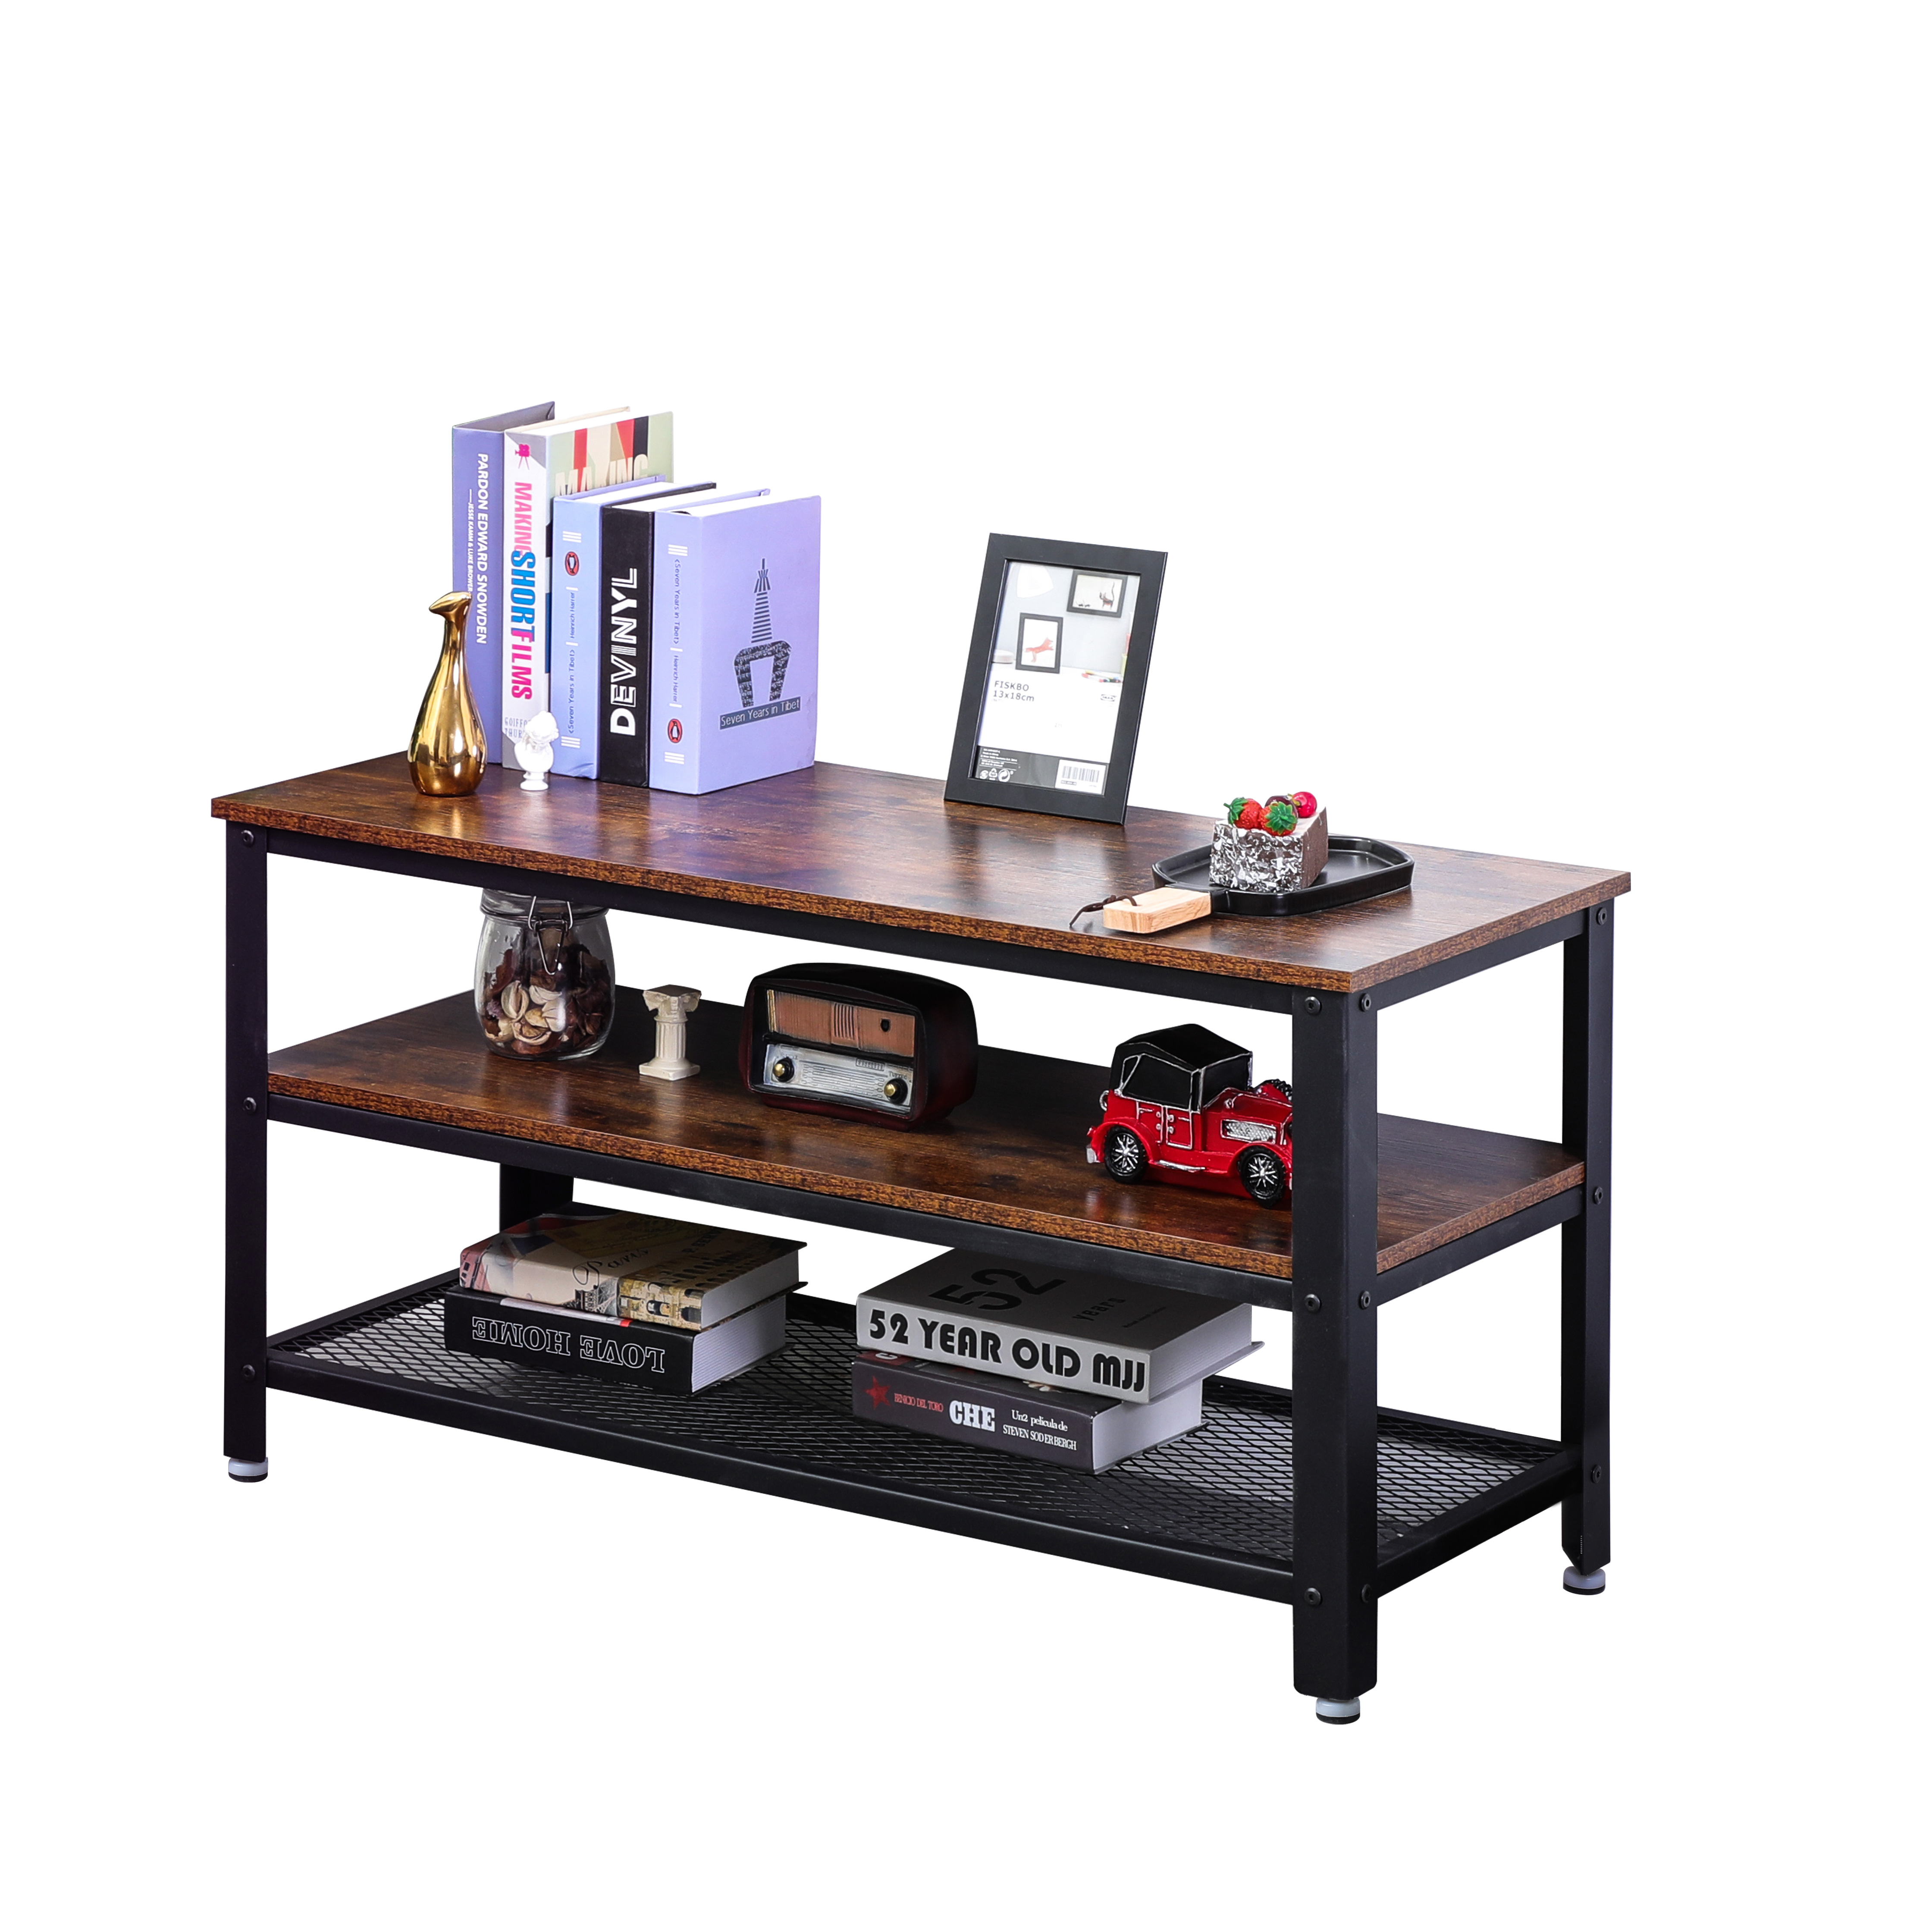 Industrial TV Table with Storage Shelf for Living Room, Wood Look Accent Furniture with Metal Frame, Easy Assembly, Rustic Brown.-Boyel Living